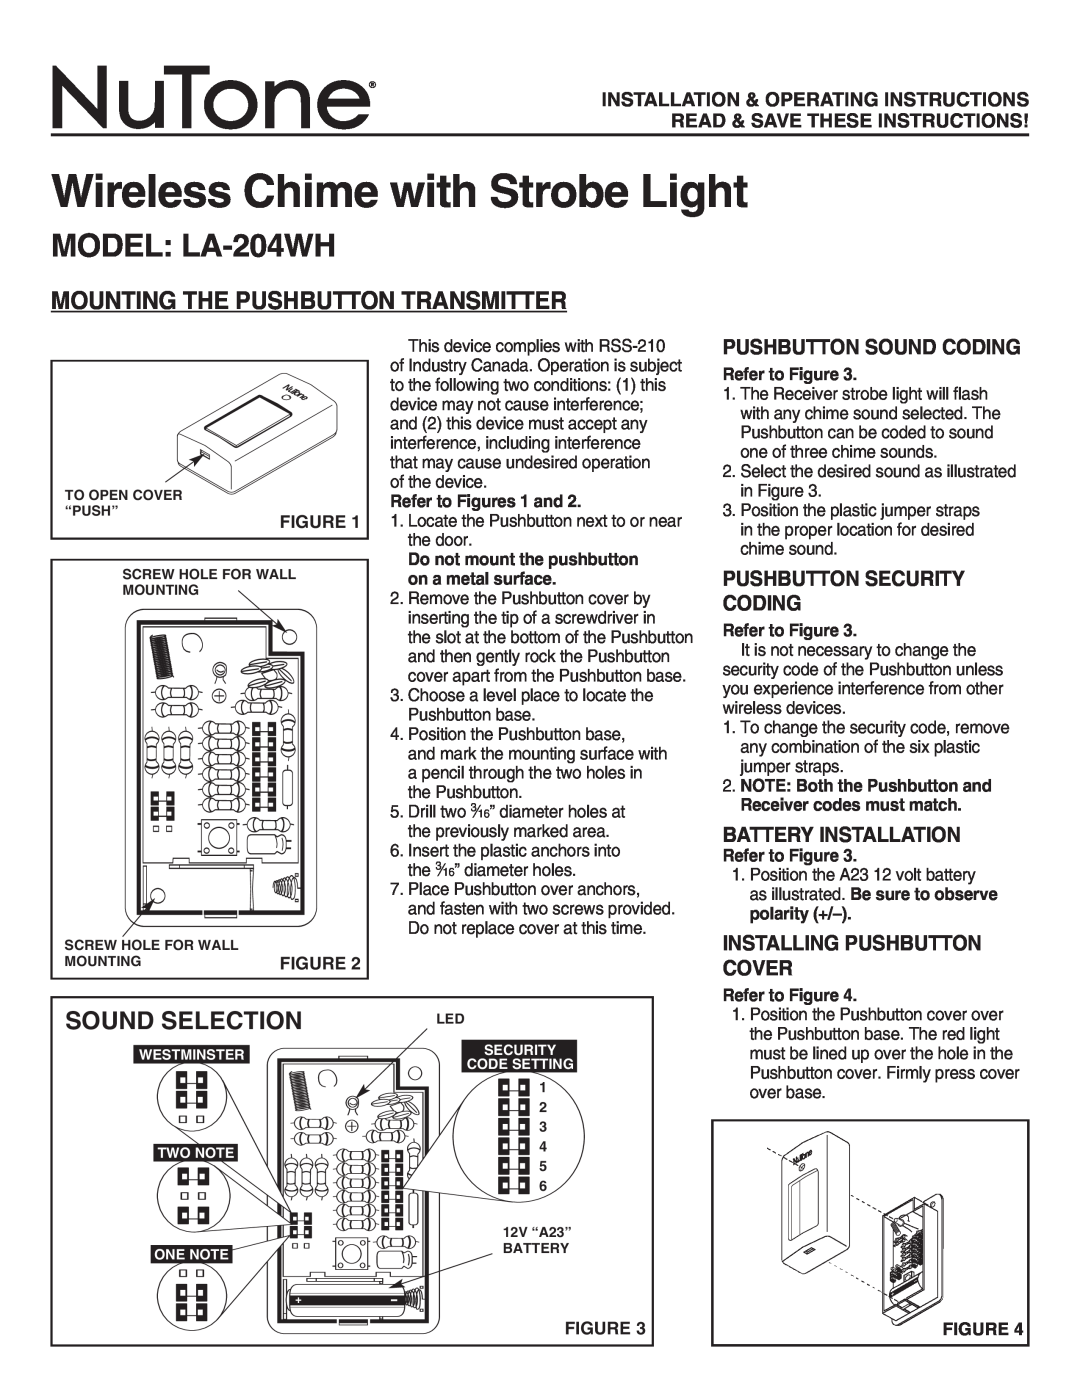 NuTone operating instructions Wireless Chime with Strobe Light, MODEL LA-204WH, Mounting The Pushbutton Transmitter 